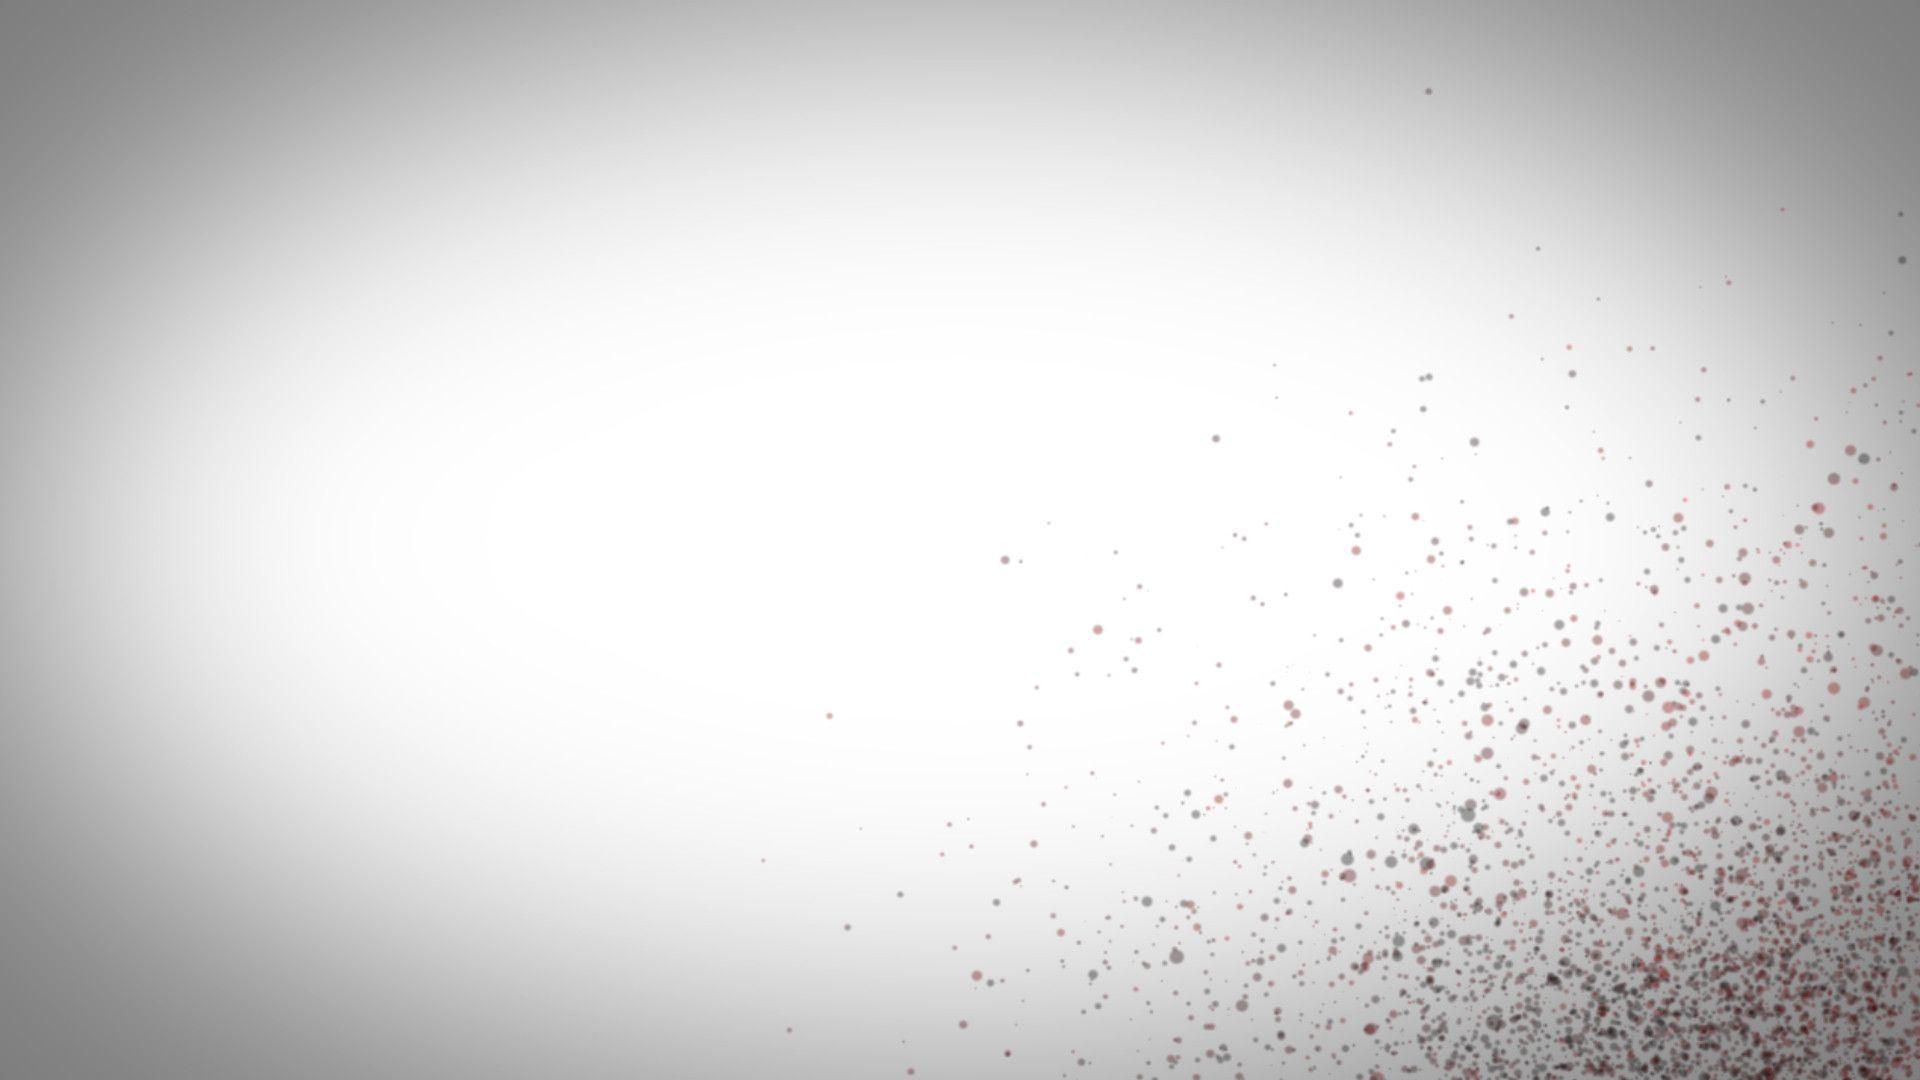 Simple Particle Wallpaper [1920 x1080]